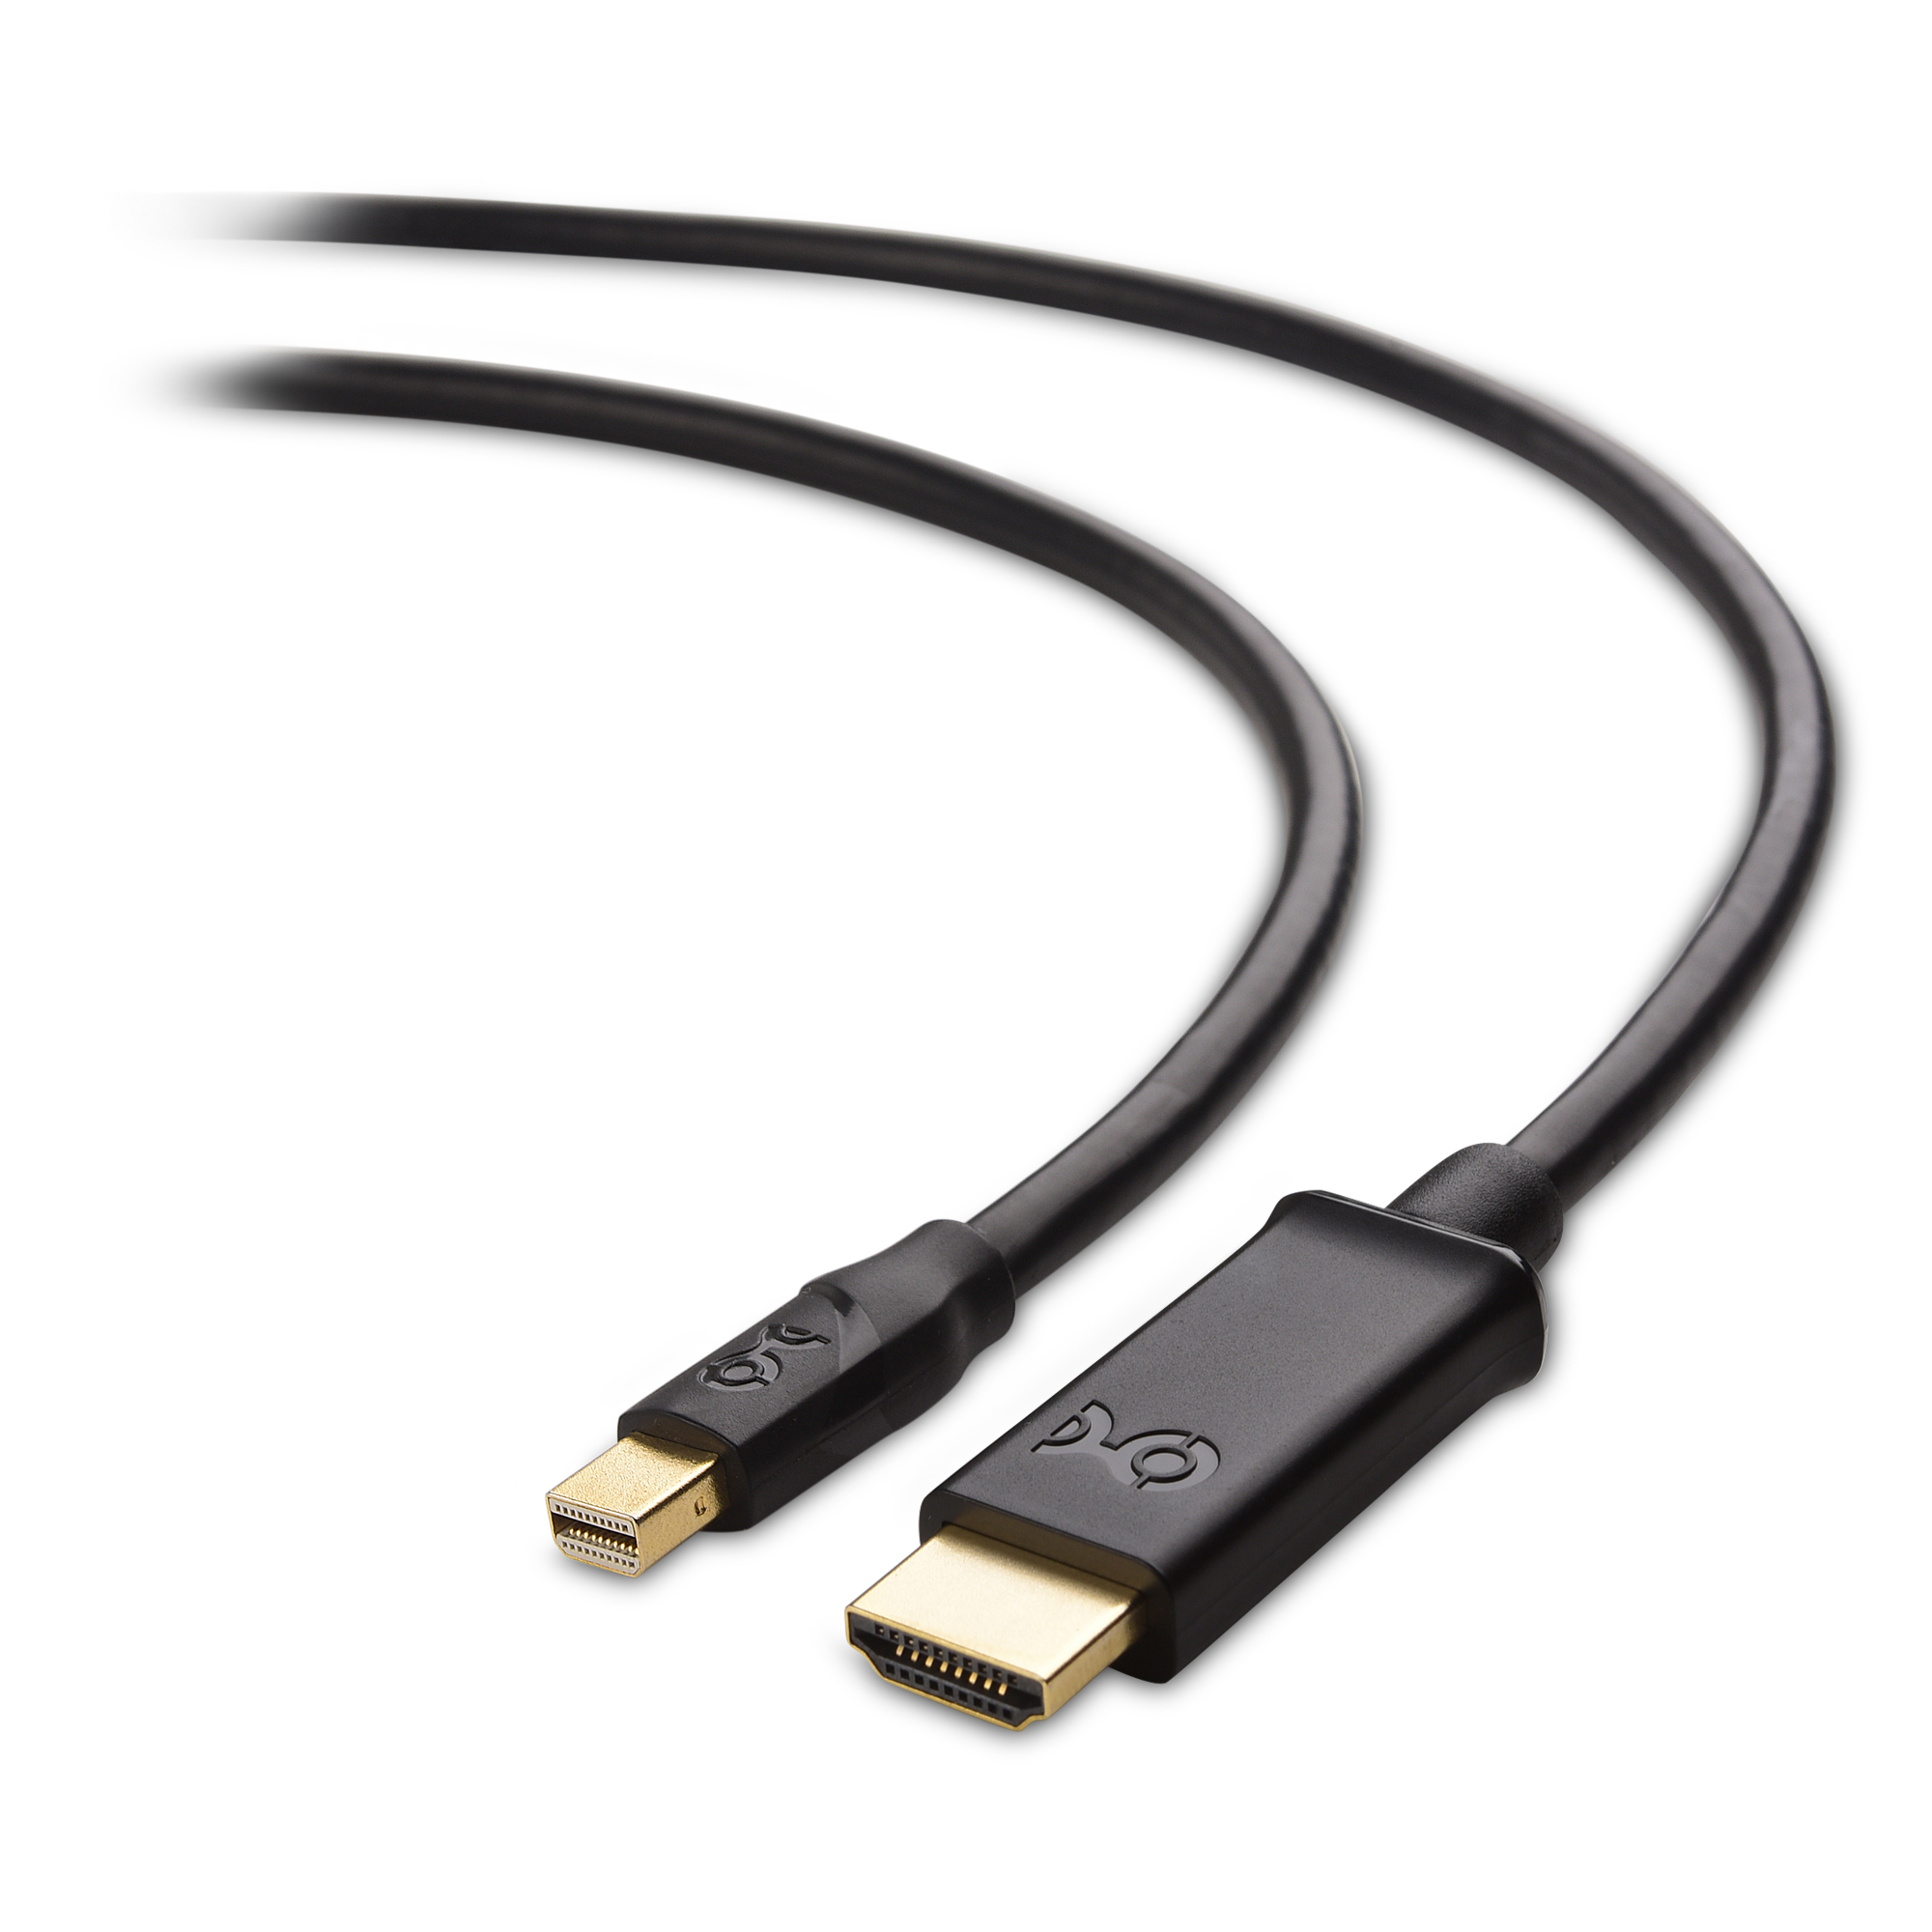 connect macbook to hdmi tv with sound amazon